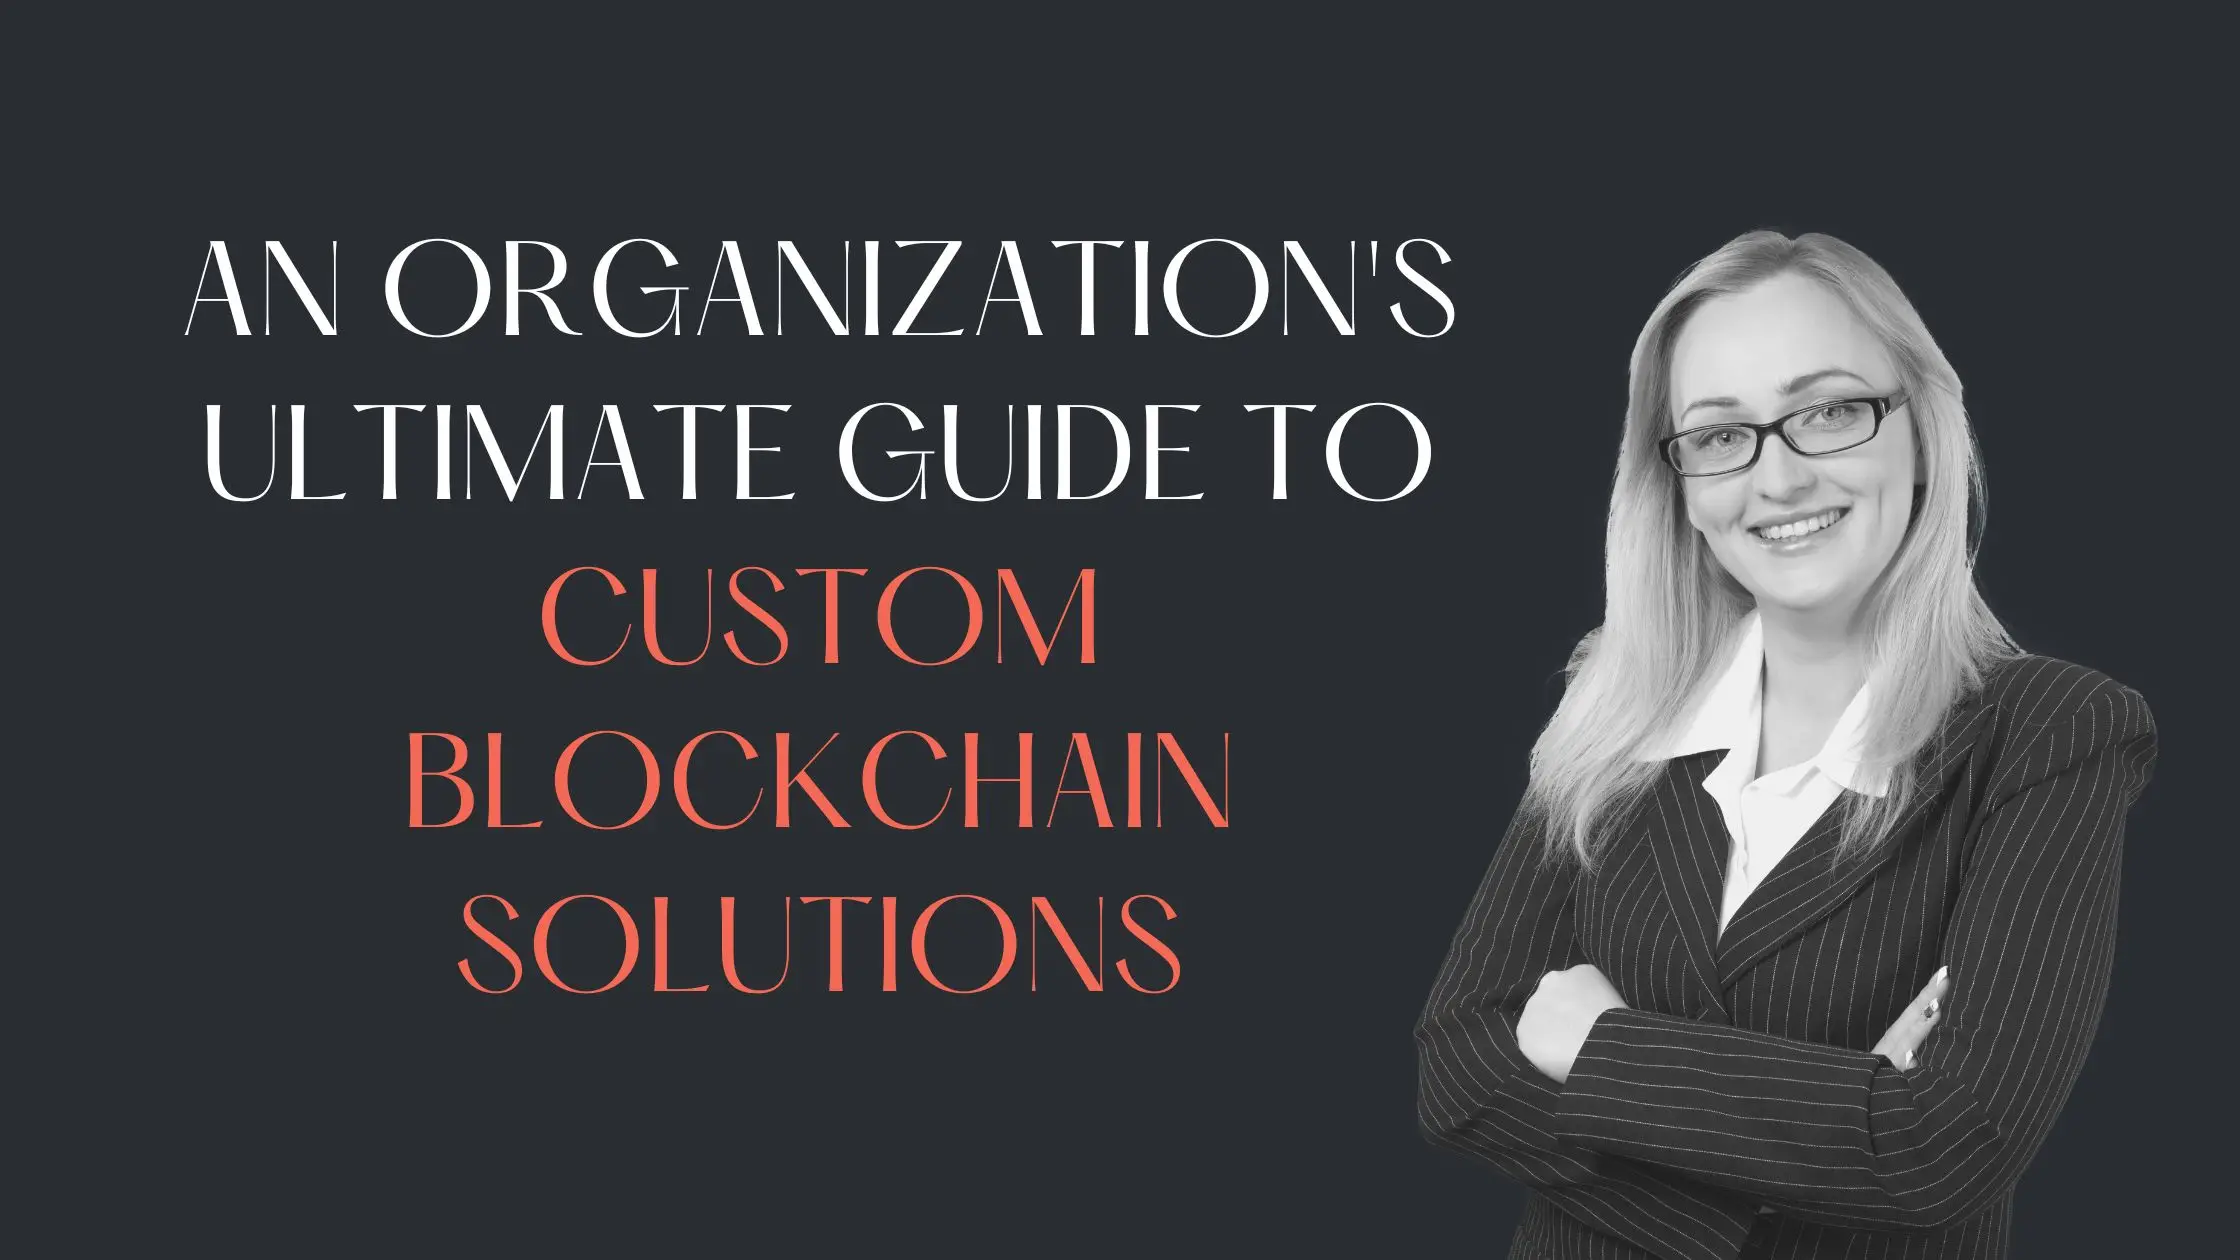 An organization’s ultimate guide to custom blockchain solutions